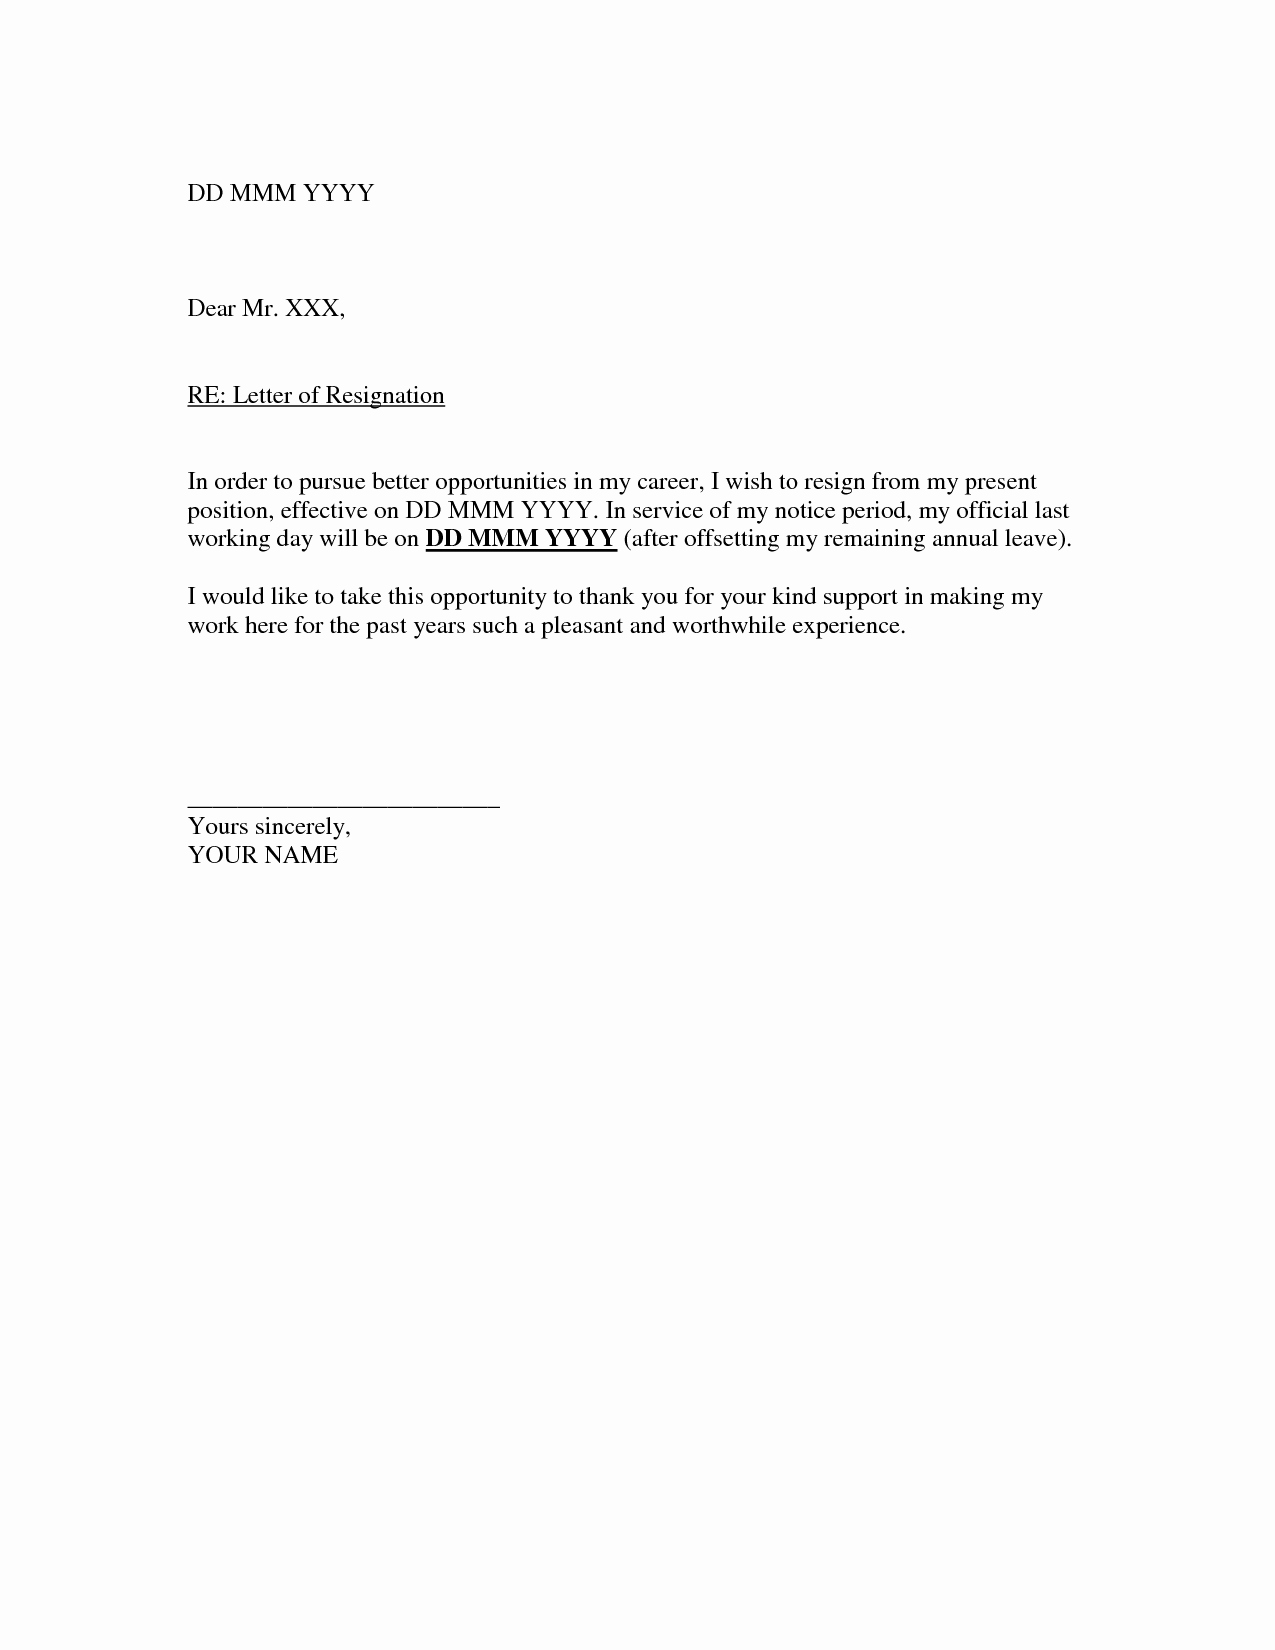 Related to Resignation Letter Template Letters Of